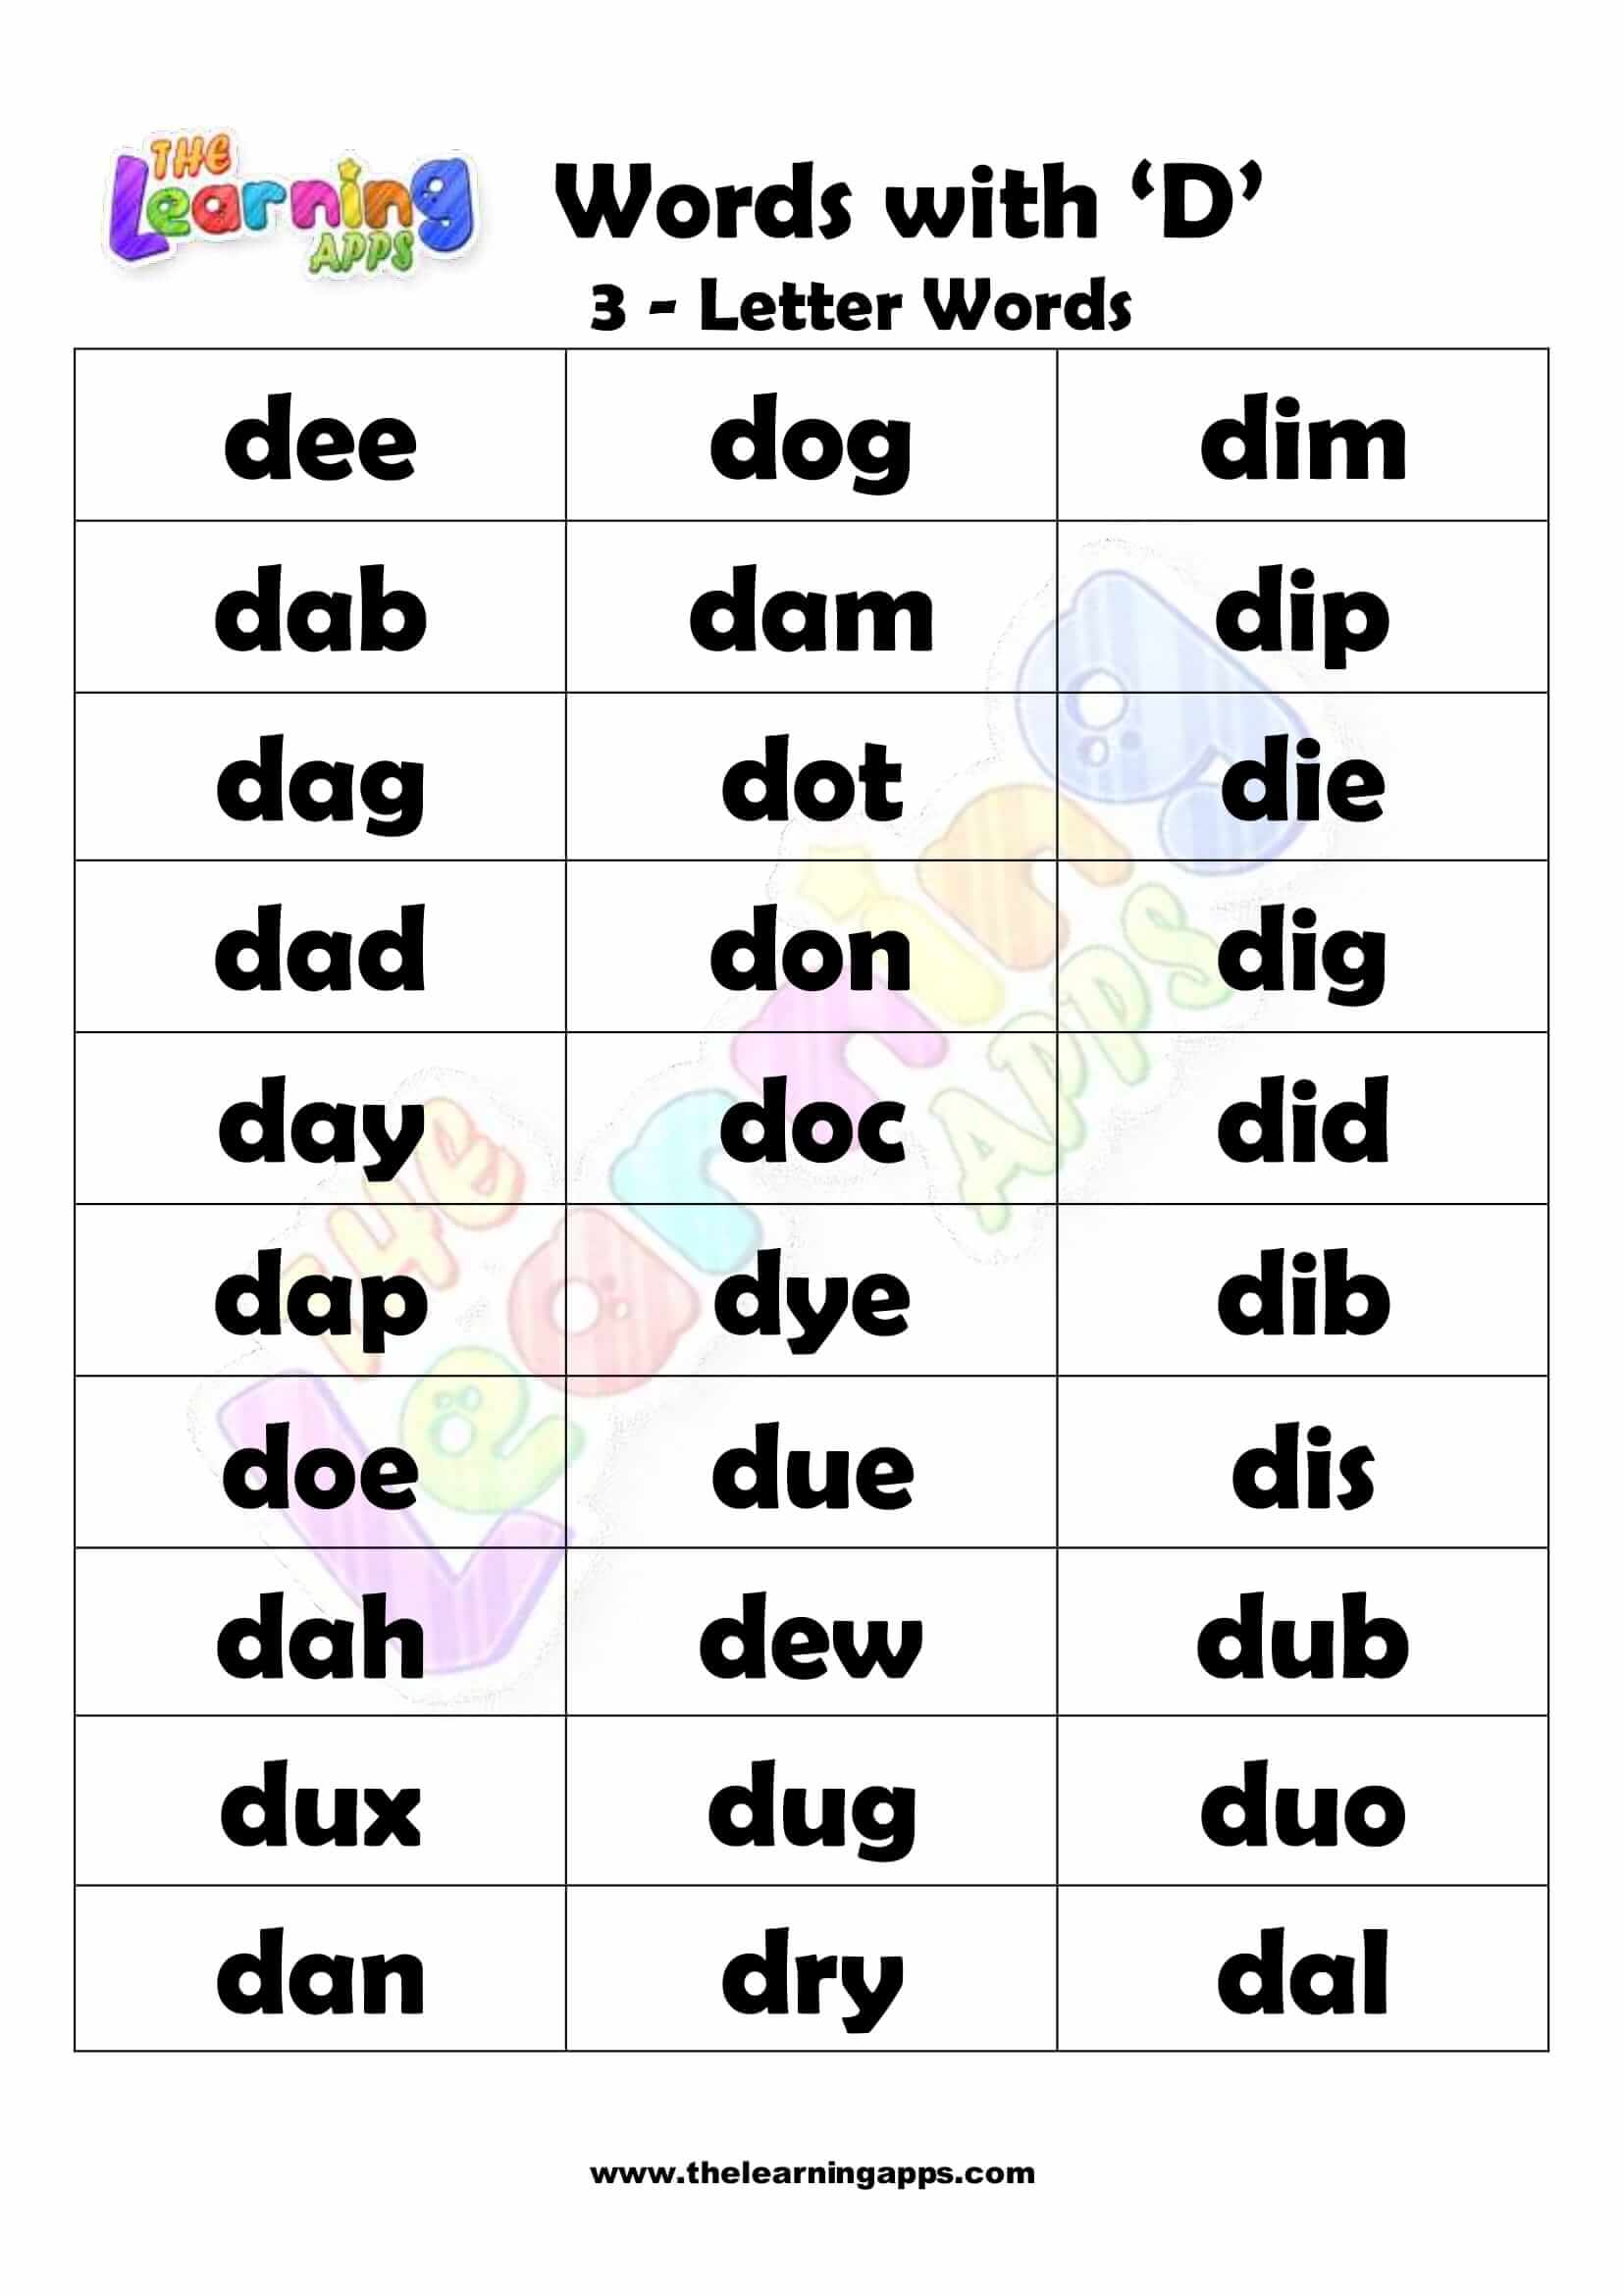 3 LETTER WORD STARTING WITH D